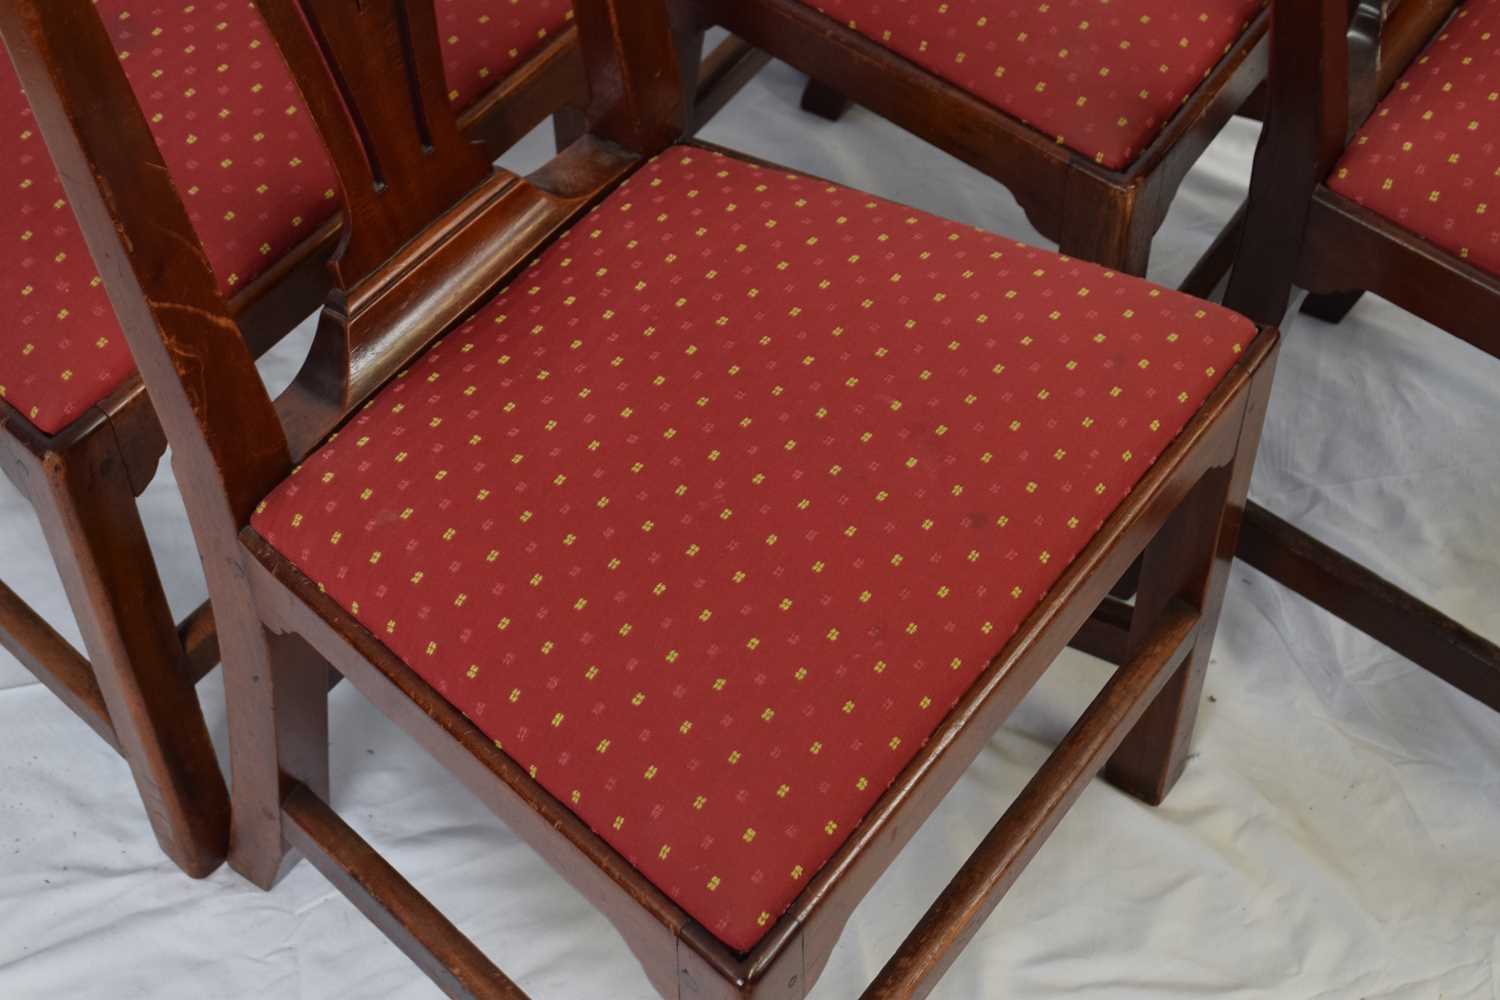 Set of eight 19th century mahogany dining chairs with pierced splat backs and red upholstered seats - Image 4 of 4